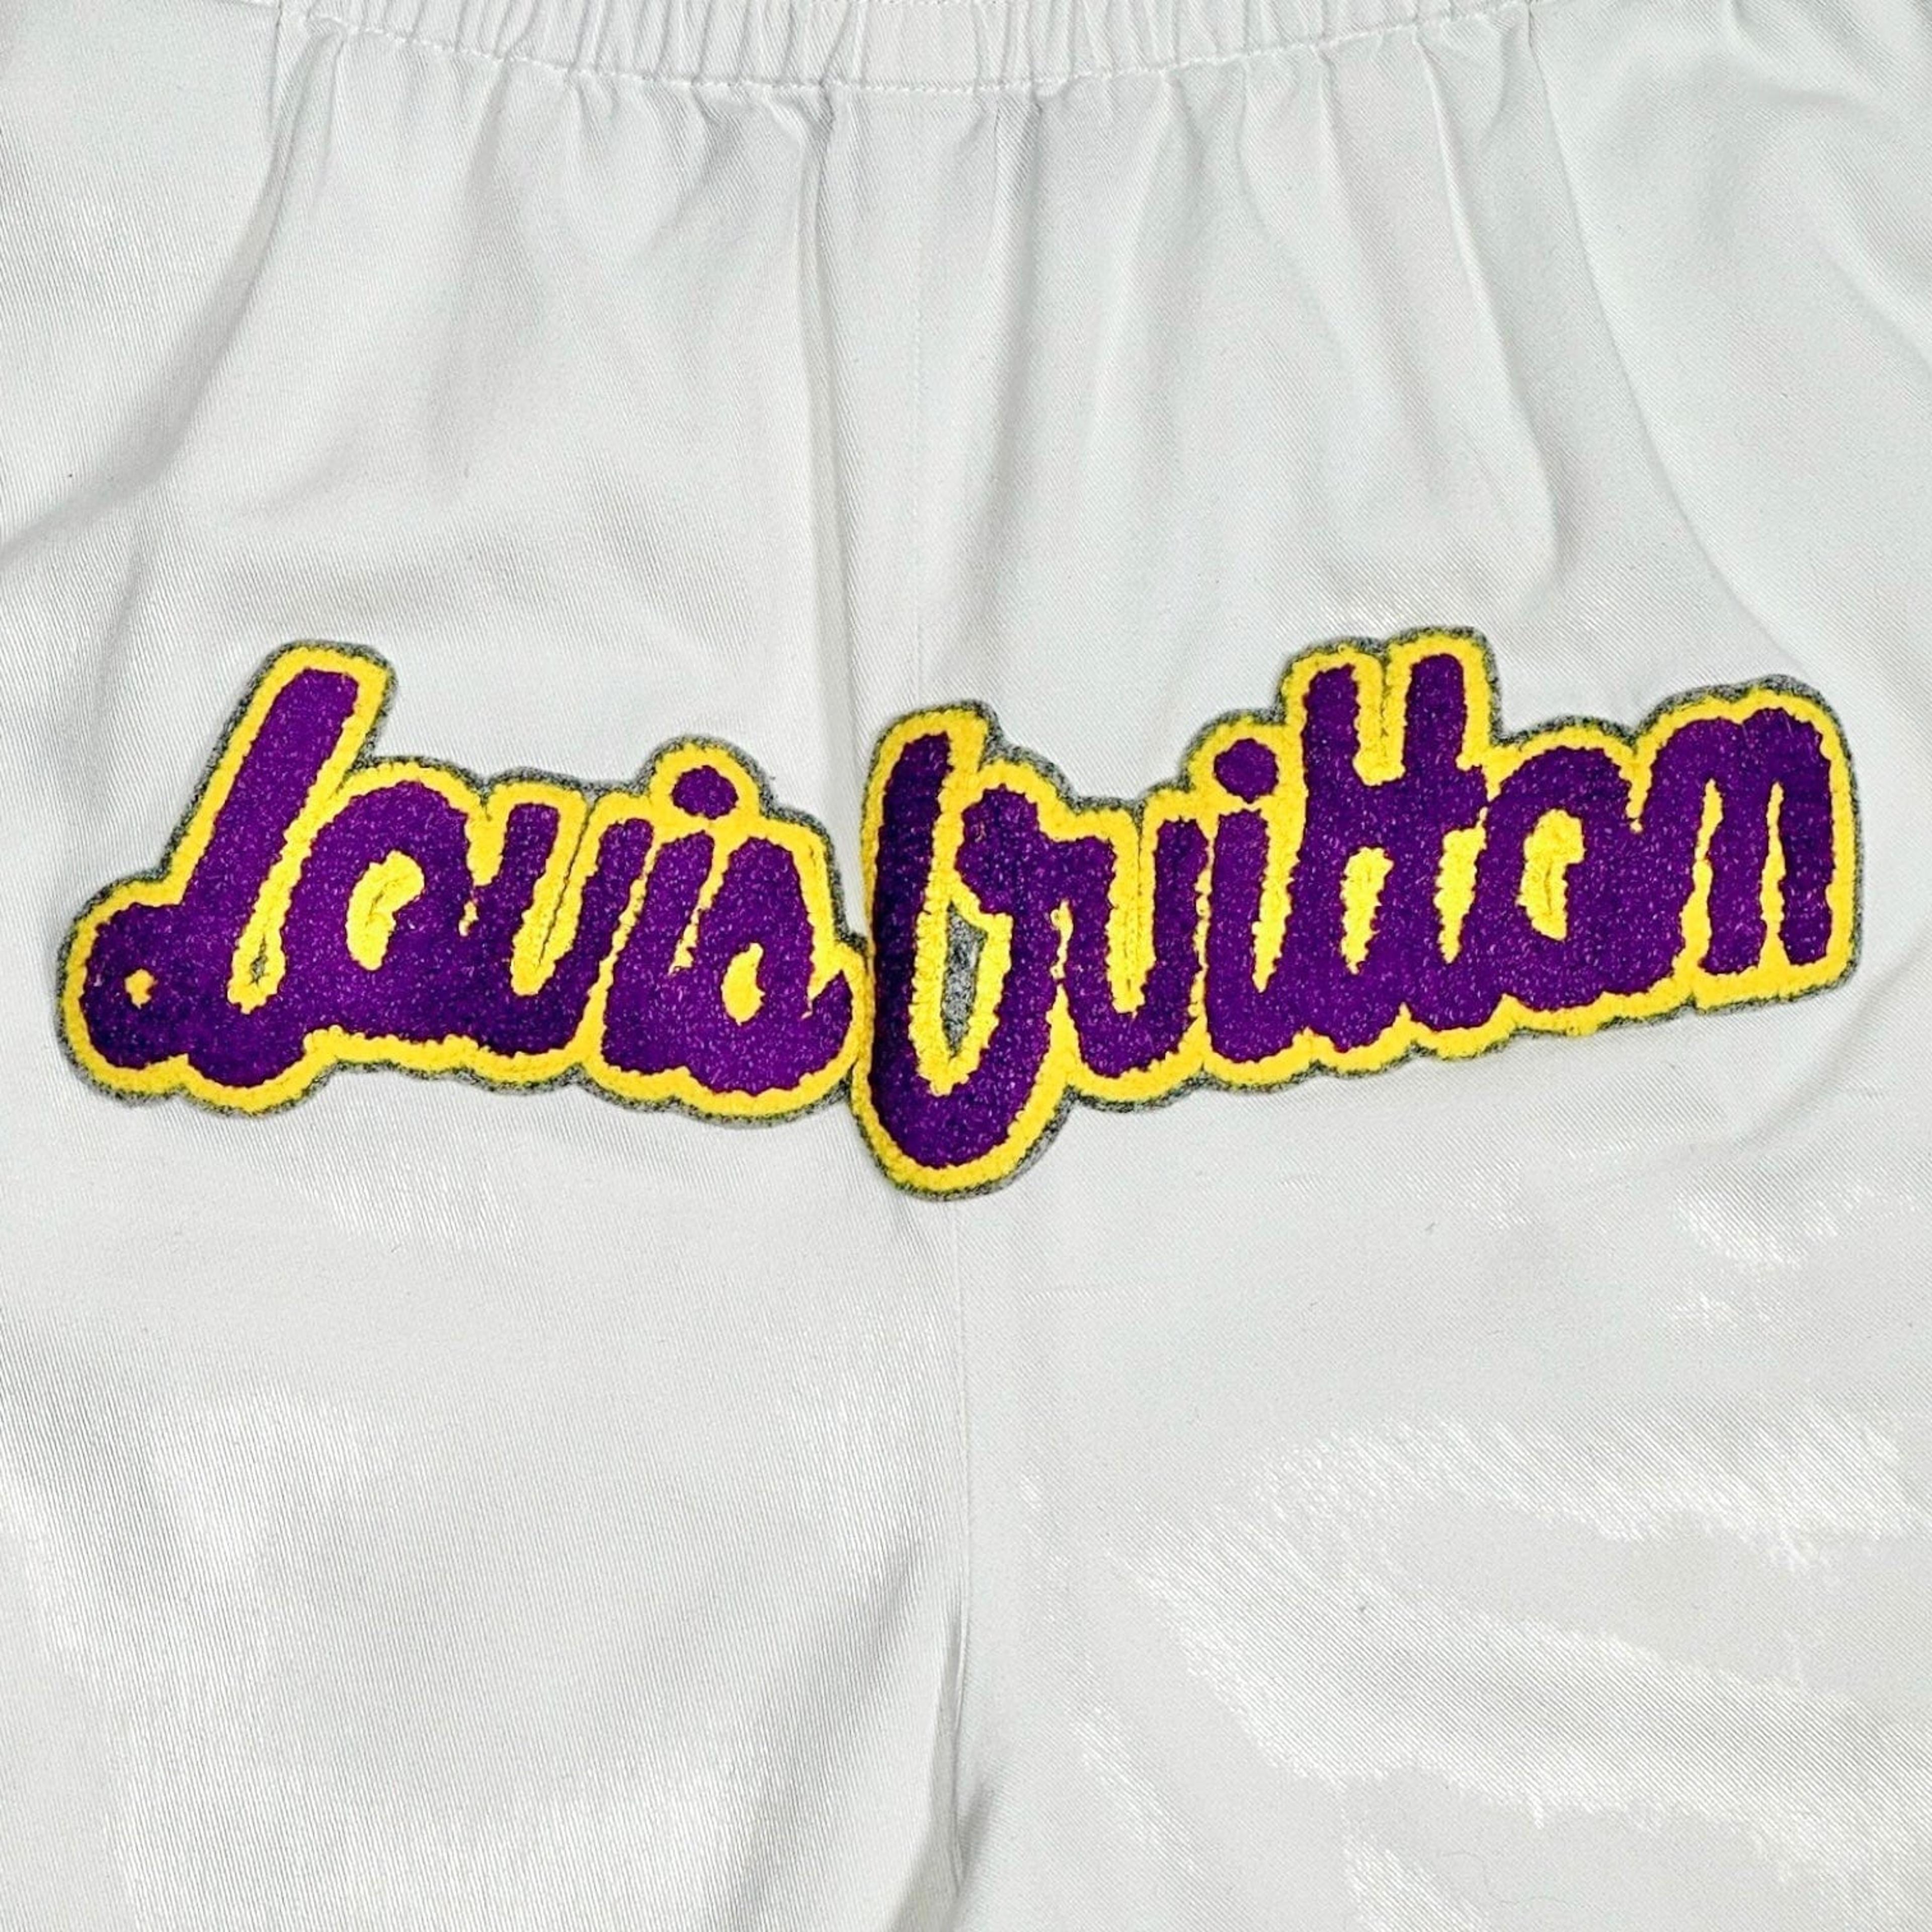 Alternate View 2 of Louis Vuitton x NBA Basketball Shorts Beige Pre-Owned